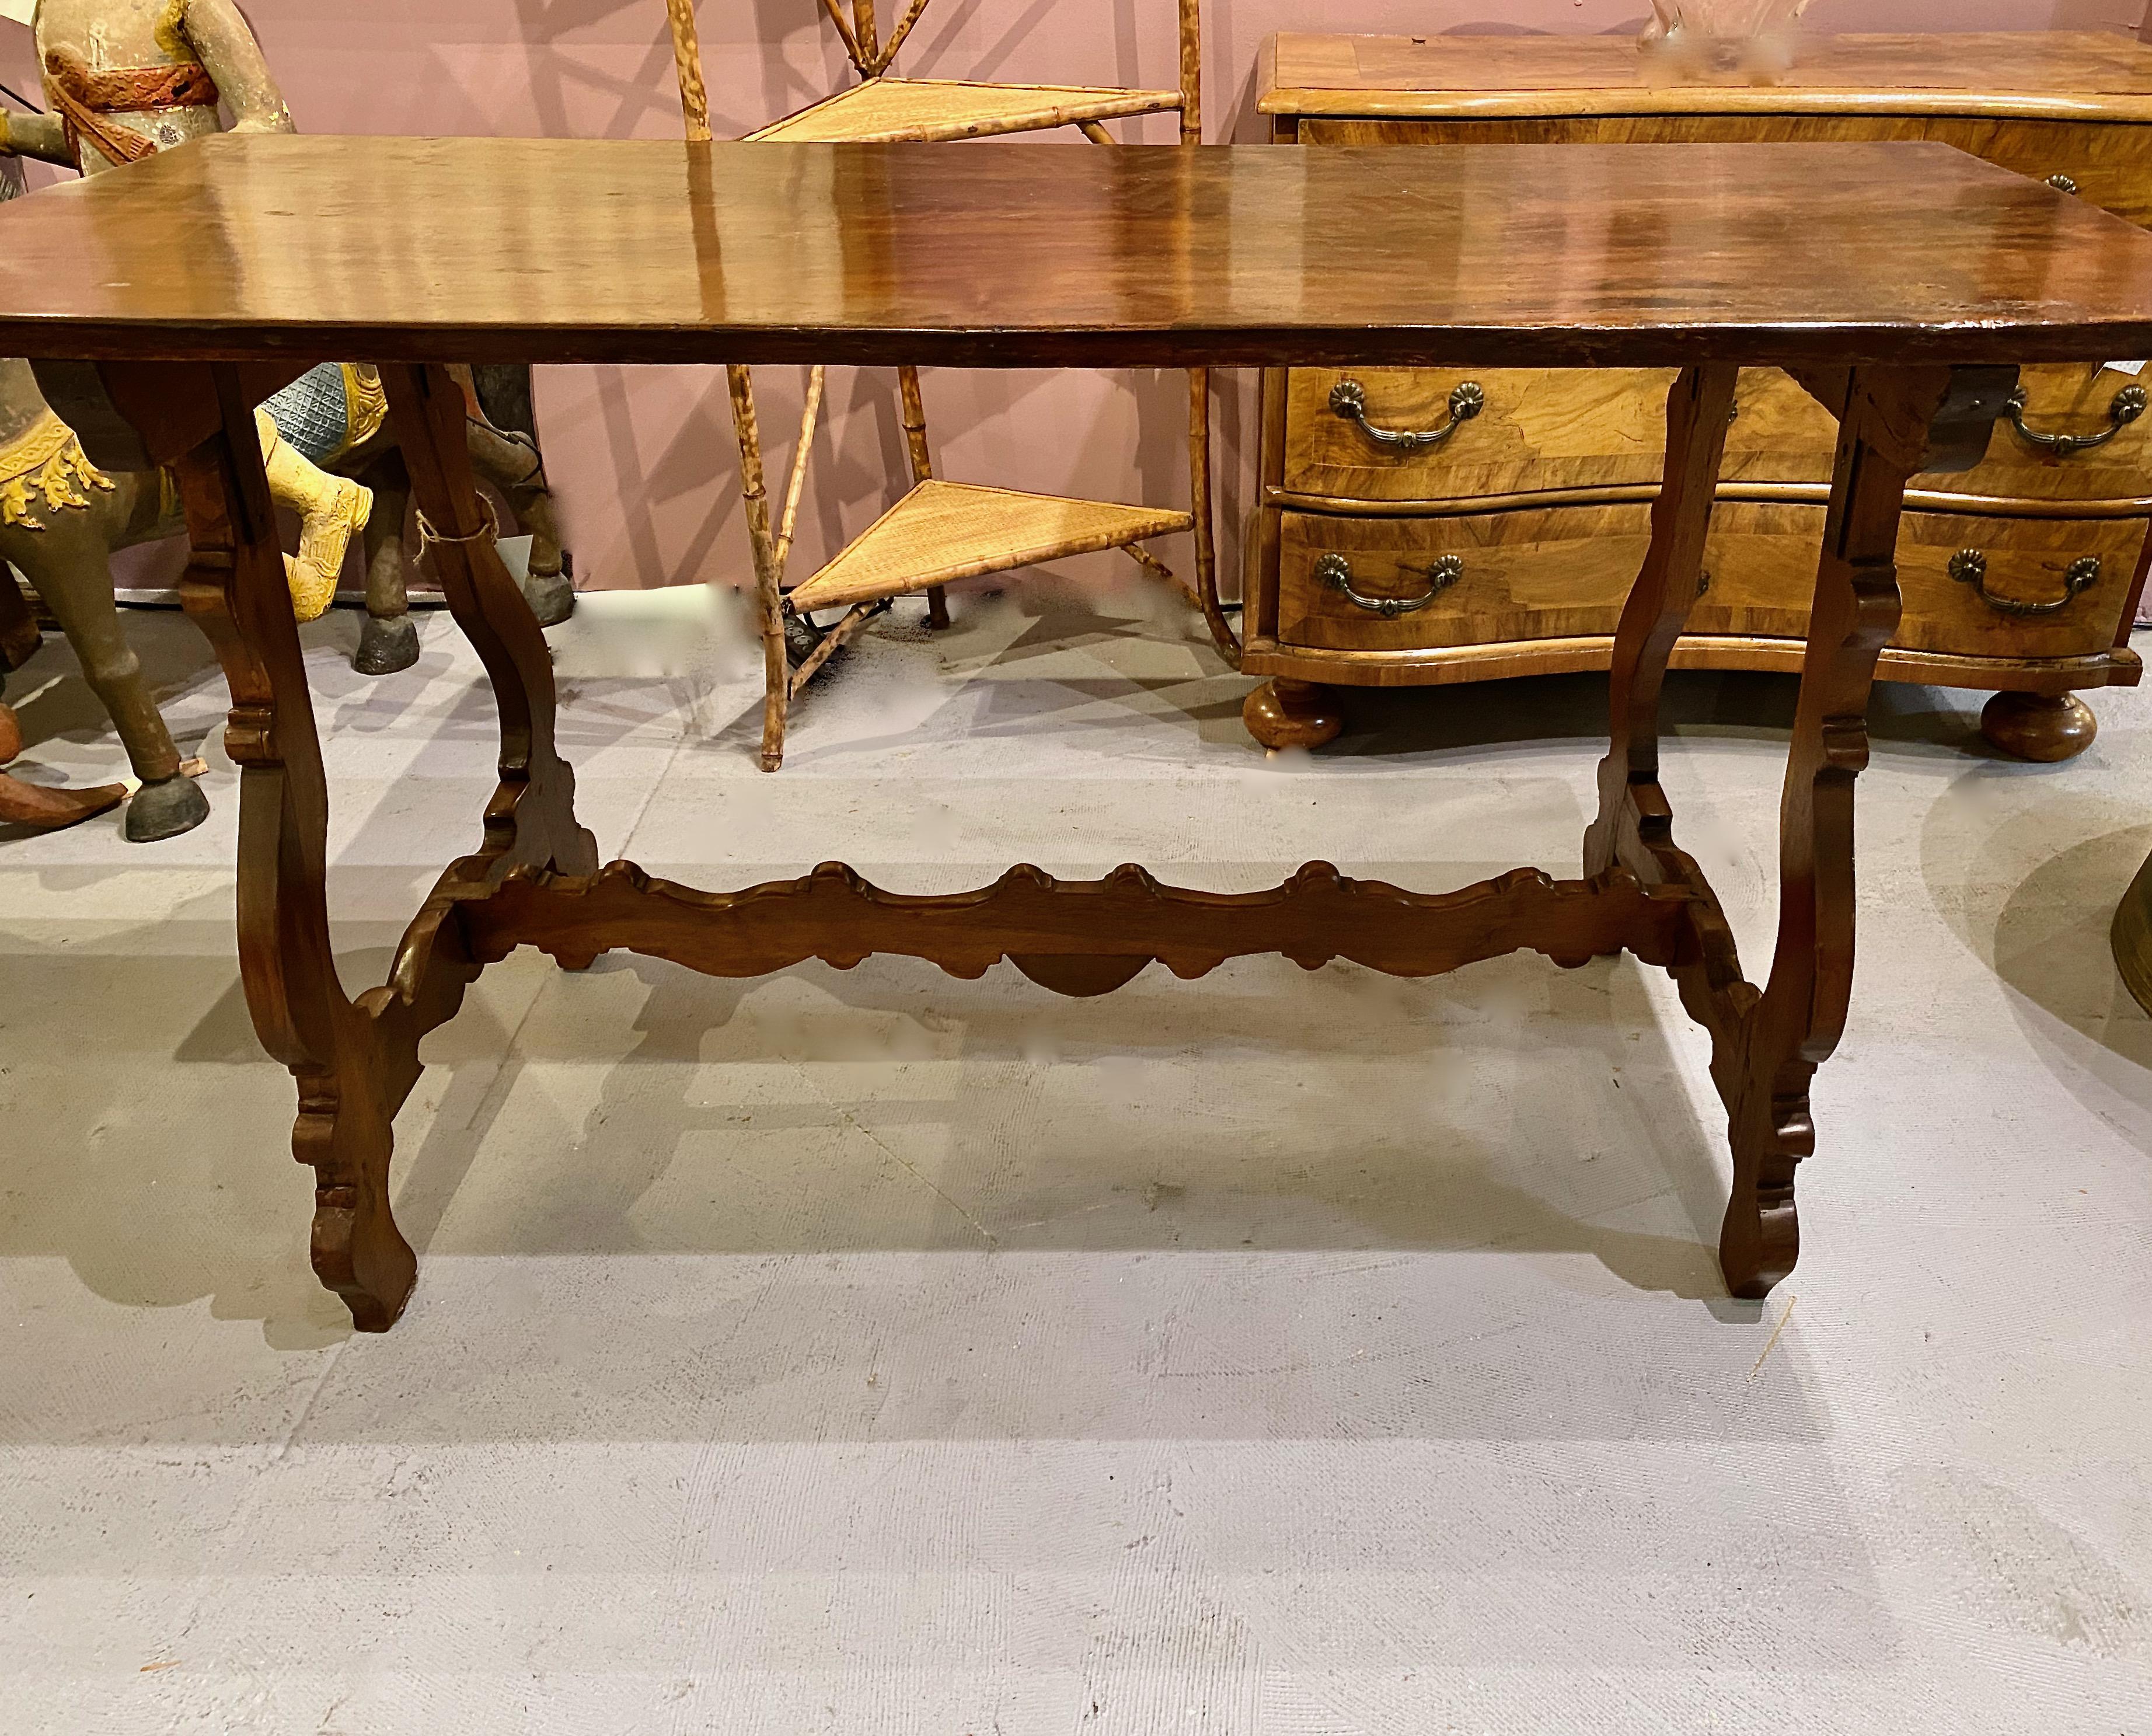 This is a charming small Spanish walnut trestle table that date to the late 19th or early 20th century. The table is in overall very good condition. It has been refinished and there are areas of old restoration which contributes to the table's